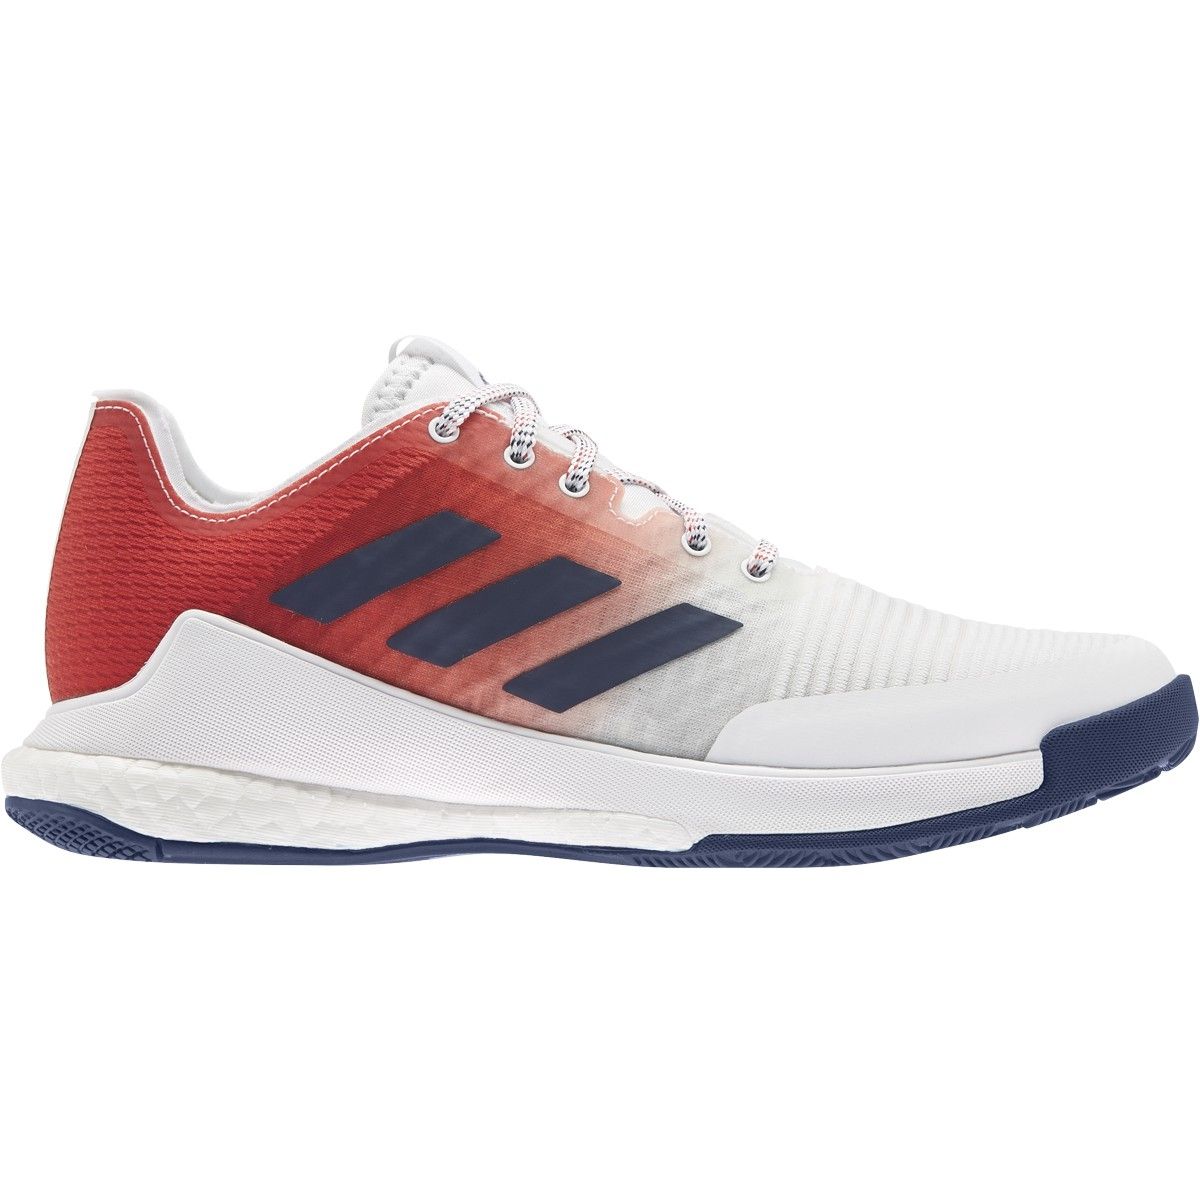 Adidas Game Court Men's Sneakers Tennis Shoe White Navy Athletic